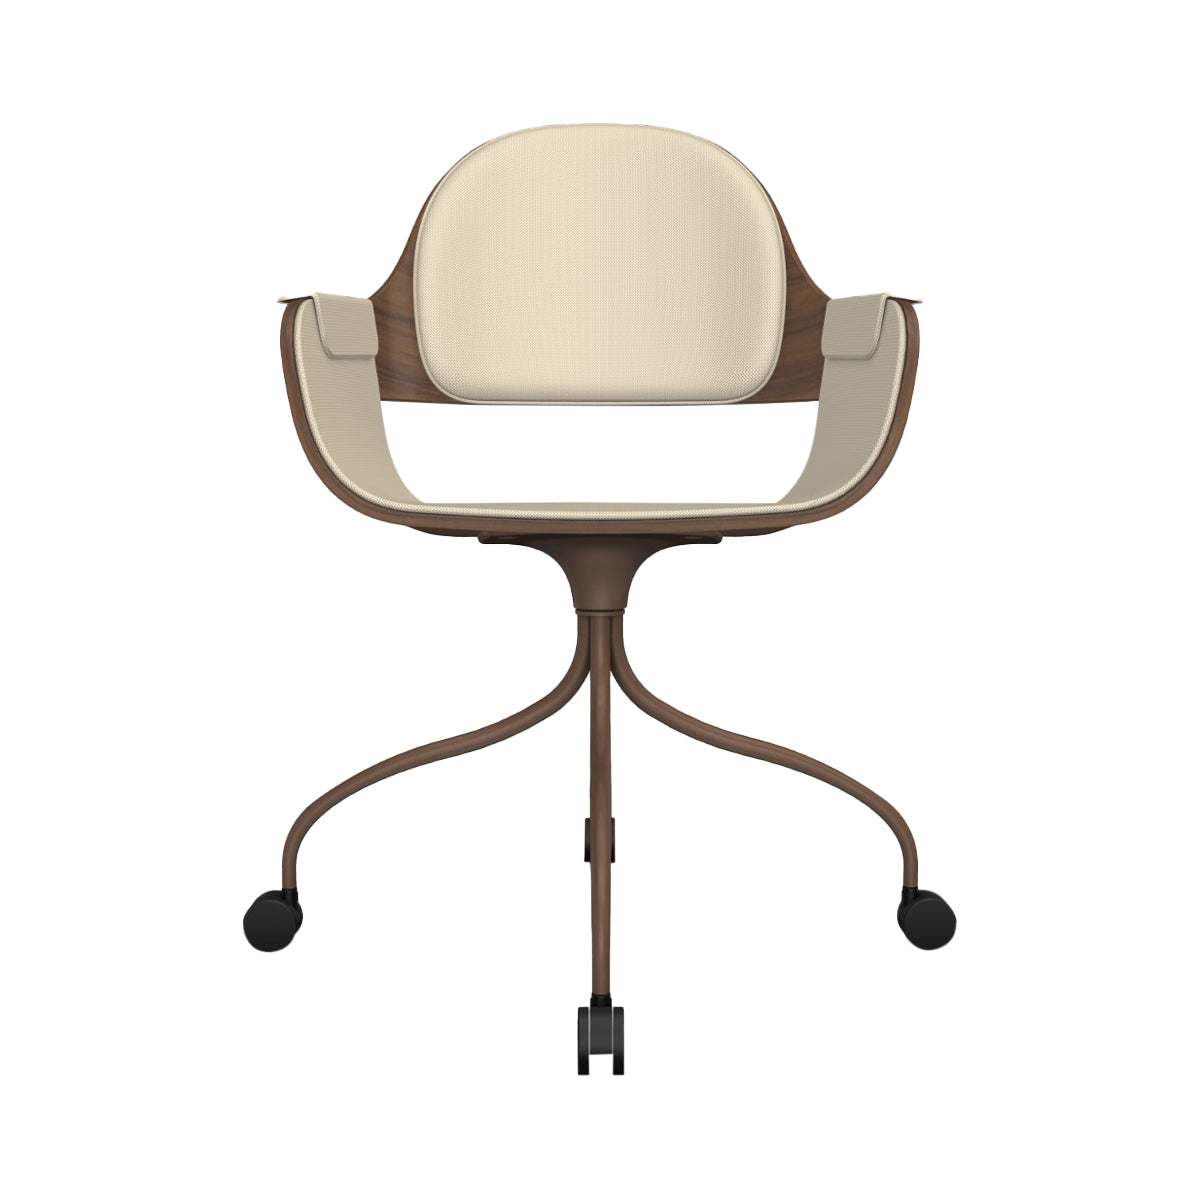 Showtime Nude Chair with Wheel: Interior Seat + Backrest Cushion + Walnut + Pale Brown